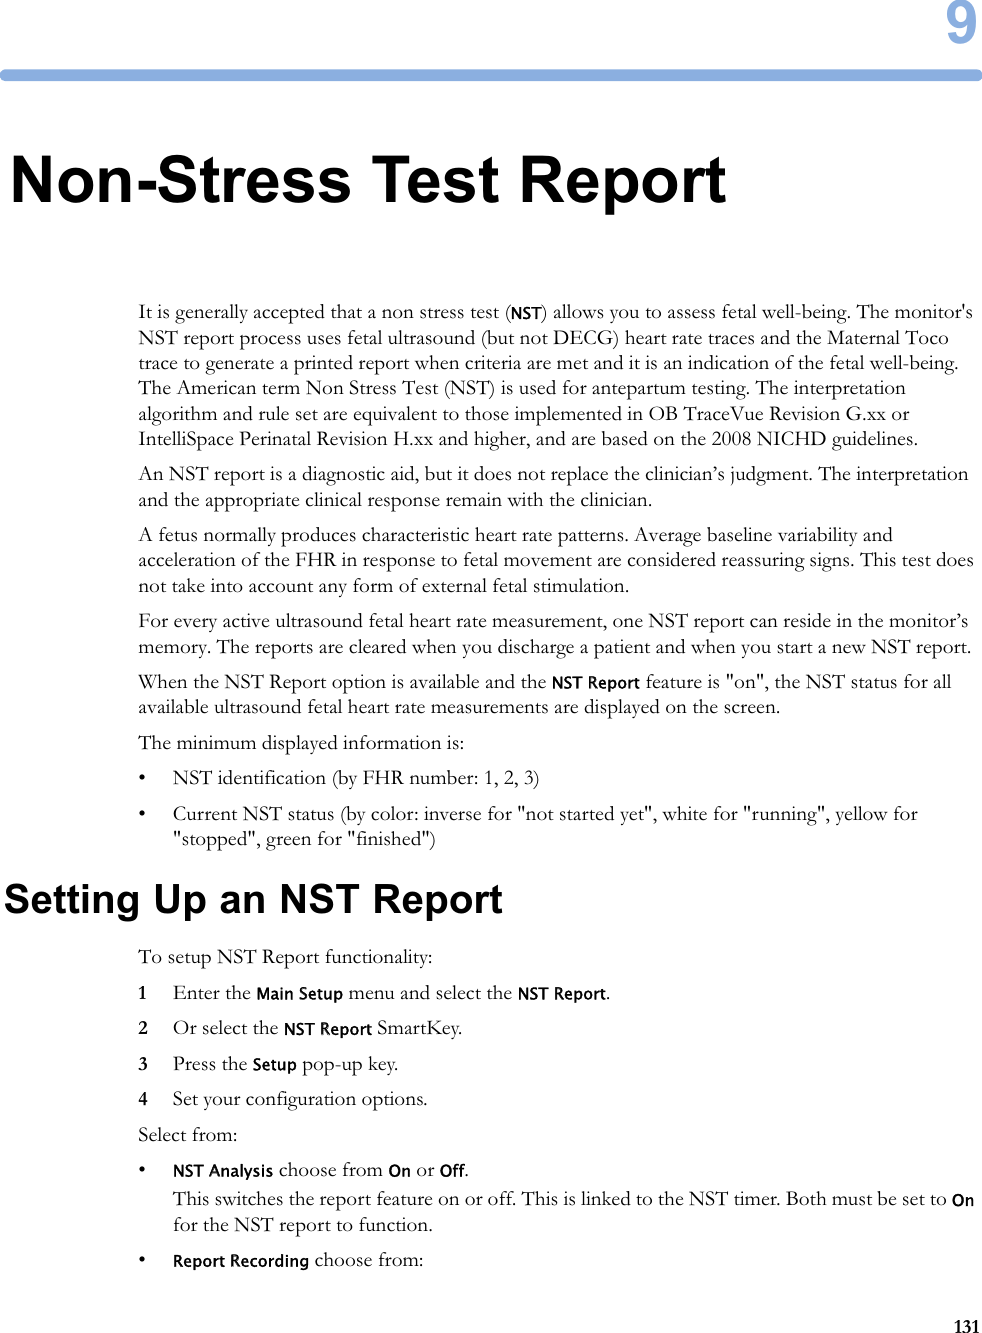 91319Non-Stress Test ReportIt is generally accepted that a non stress test (NST) allows you to assess fetal well-being. The monitor&apos;s NST report process uses fetal ultrasound (but not DECG) heart rate traces and the Maternal Toco trace to generate a printed report when criteria are met and it is an indication of the fetal well-being. The American term Non Stress Test (NST) is used for antepartum testing. The interpretation algorithm and rule set are equivalent to those implemented in OB TraceVue Revision G.xx or IntelliSpace Perinatal Revision H.xx and higher, and are based on the 2008 NICHD guidelines.An NST report is a diagnostic aid, but it does not replace the clinician’s judgment. The interpretation and the appropriate clinical response remain with the clinician.A fetus normally produces characteristic heart rate patterns. Average baseline variability and acceleration of the FHR in response to fetal movement are considered reassuring signs. This test does not take into account any form of external fetal stimulation.For every active ultrasound fetal heart rate measurement, one NST report can reside in the monitor’s memory. The reports are cleared when you discharge a patient and when you start a new NST report.When the NST Report option is available and the NST Report feature is &quot;on&quot;, the NST status for all available ultrasound fetal heart rate measurements are displayed on the screen.The minimum displayed information is:• NST identification (by FHR number: 1, 2, 3)• Current NST status (by color: inverse for &quot;not started yet&quot;, white for &quot;running&quot;, yellow for &quot;stopped&quot;, green for &quot;finished&quot;)Setting Up an NST ReportTo setup NST Report functionality:1Enter the Main Setup menu and select the NST Report.2Or select the NST Report SmartKey.3Press the Setup pop-up key.4Set your configuration options.Select from:•NST Analysis choose from On or Off.This switches the report feature on or off. This is linked to the NST timer. Both must be set to On for the NST report to function.•Report Recording choose from: